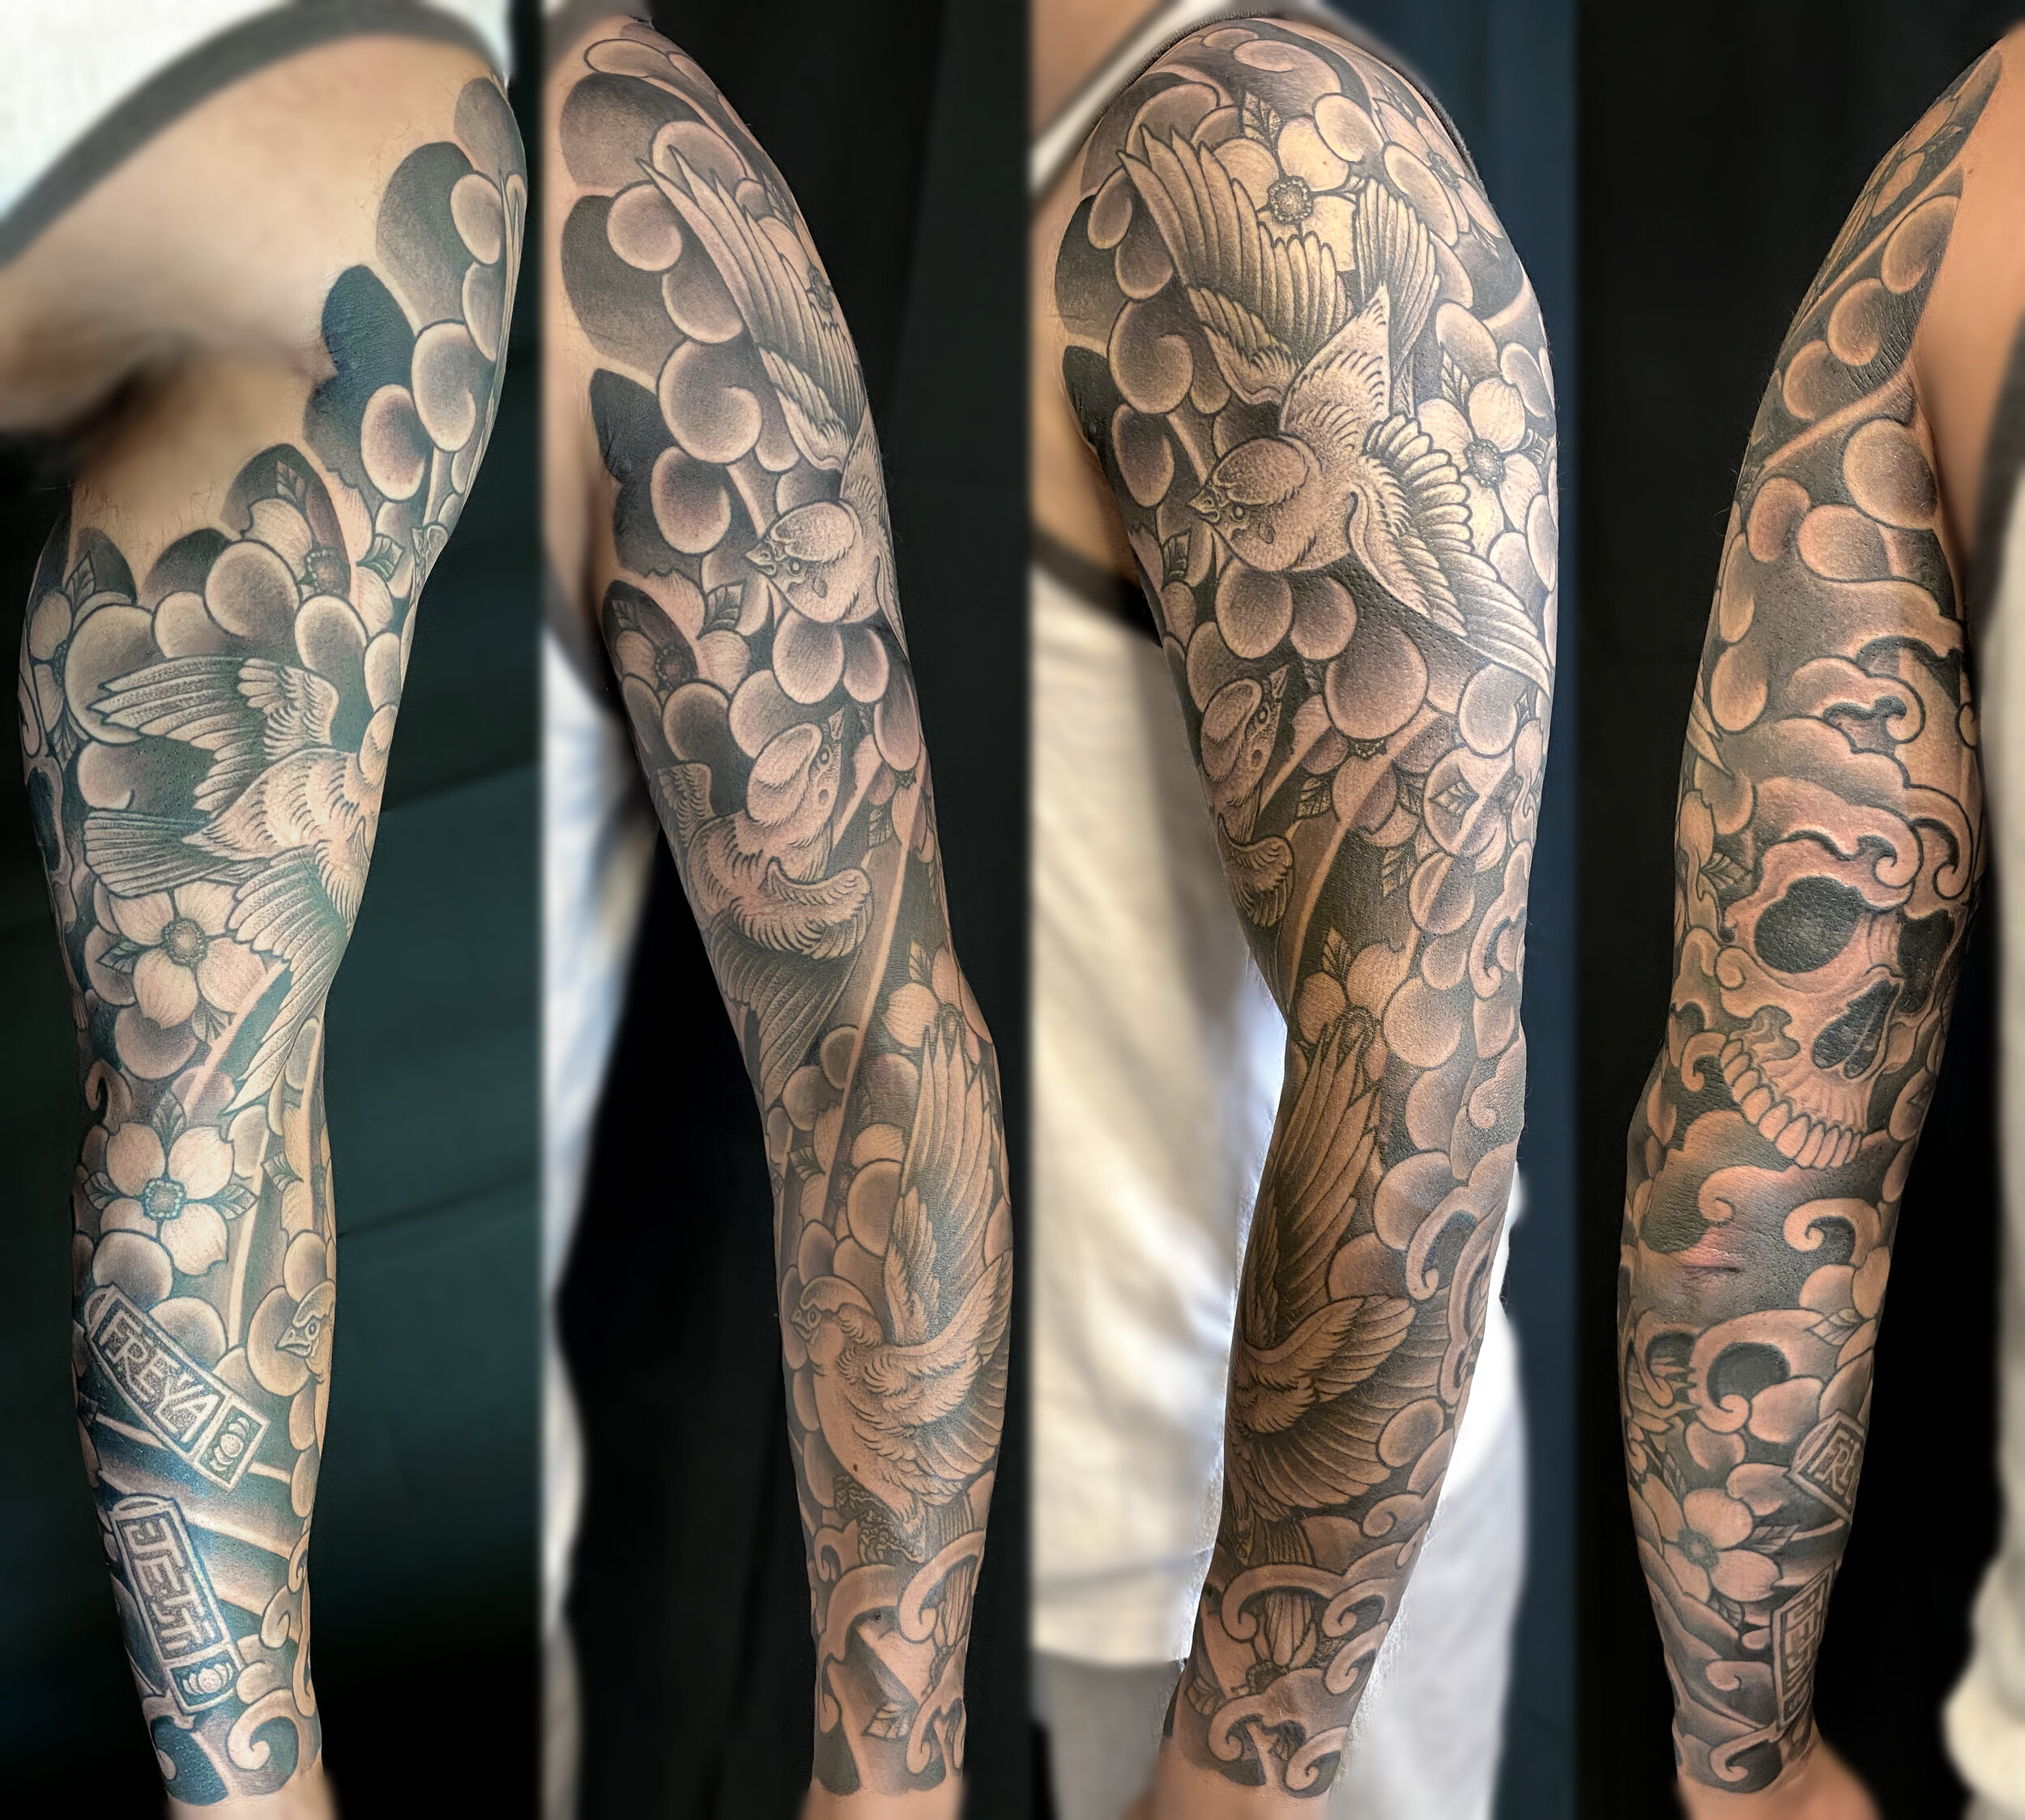 Blackout Tattoo trend turns body parts with solid blocks of black paint   AesthesiaMag